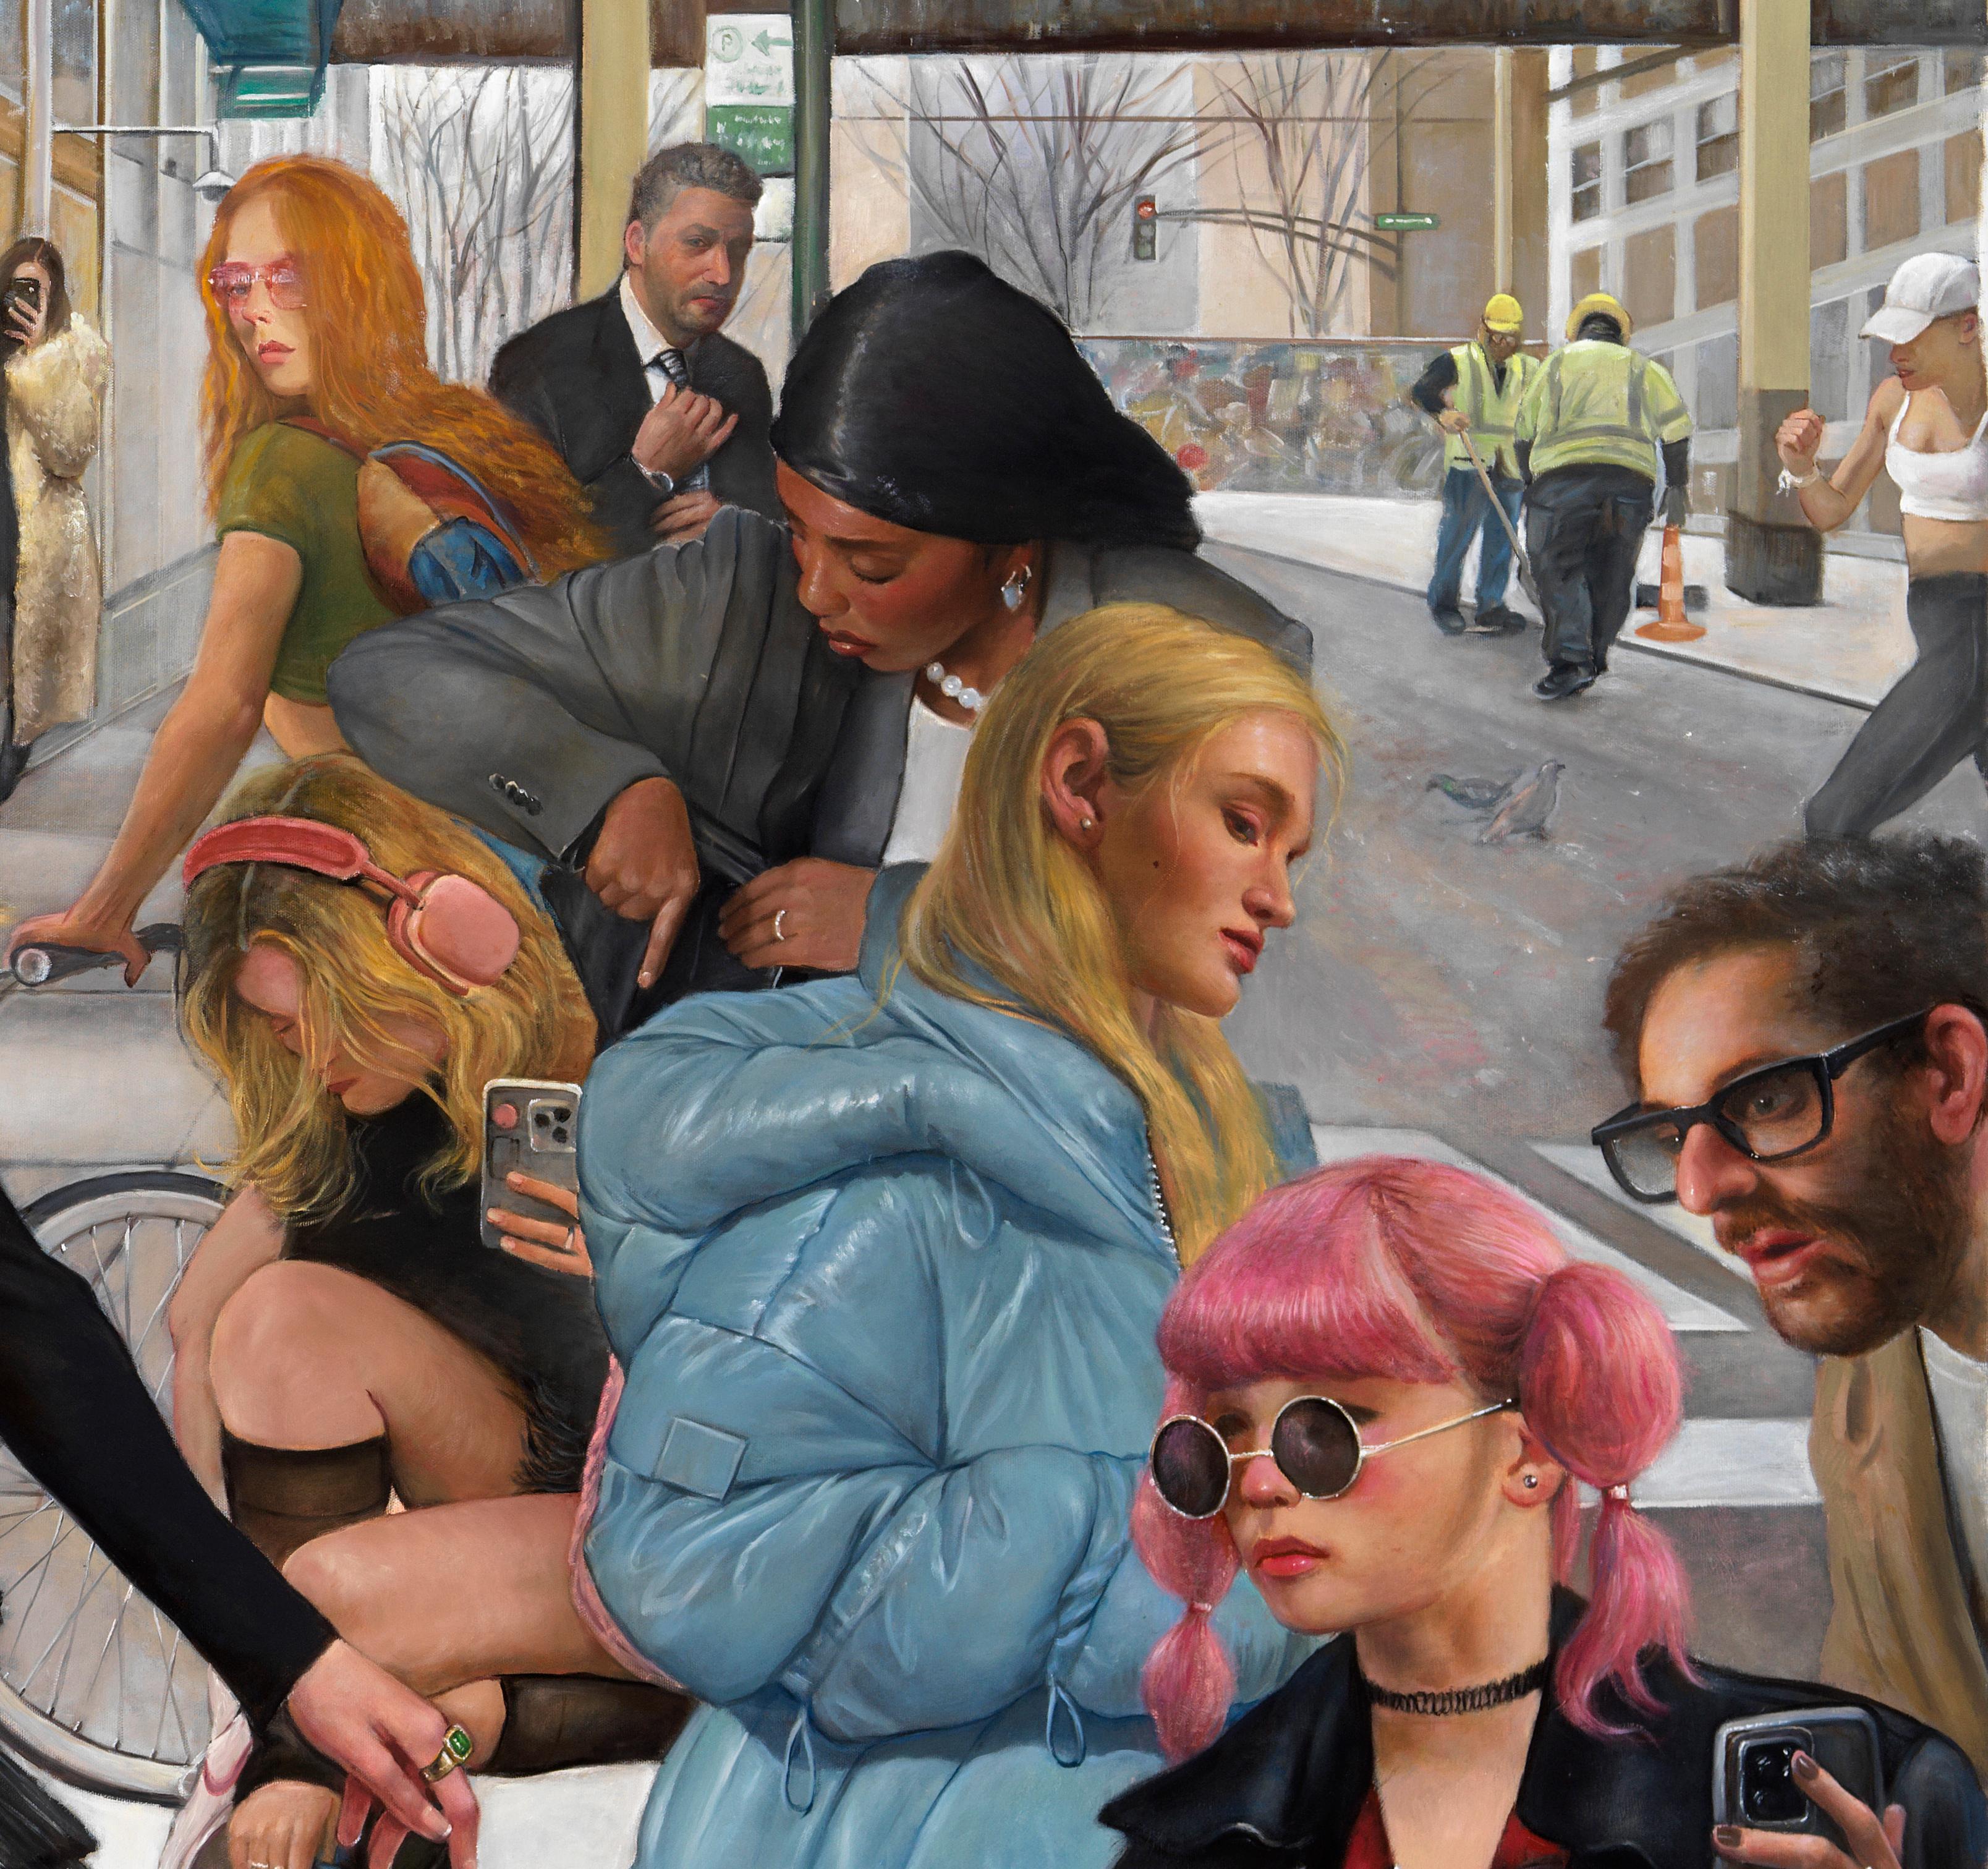 In the age of social media, we are vying for attention 24/7.  Bruno Surdo explores this idea in this large scale painting entitled 